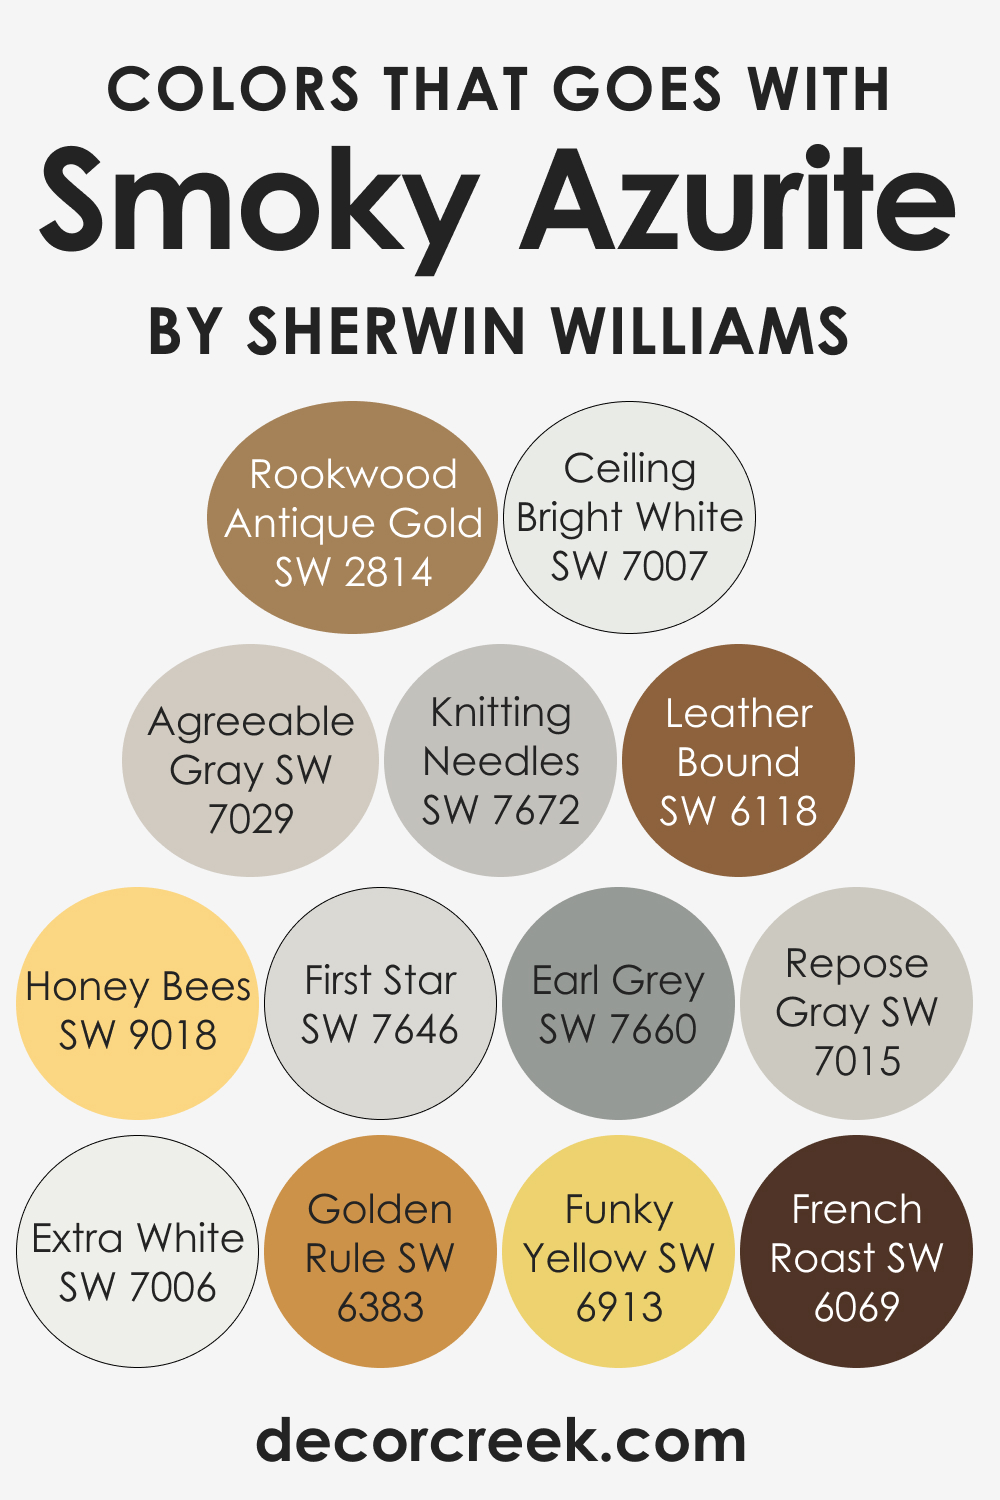 Sherwin Williams SW2814 Rookwood Antique Gold Precisely Matched